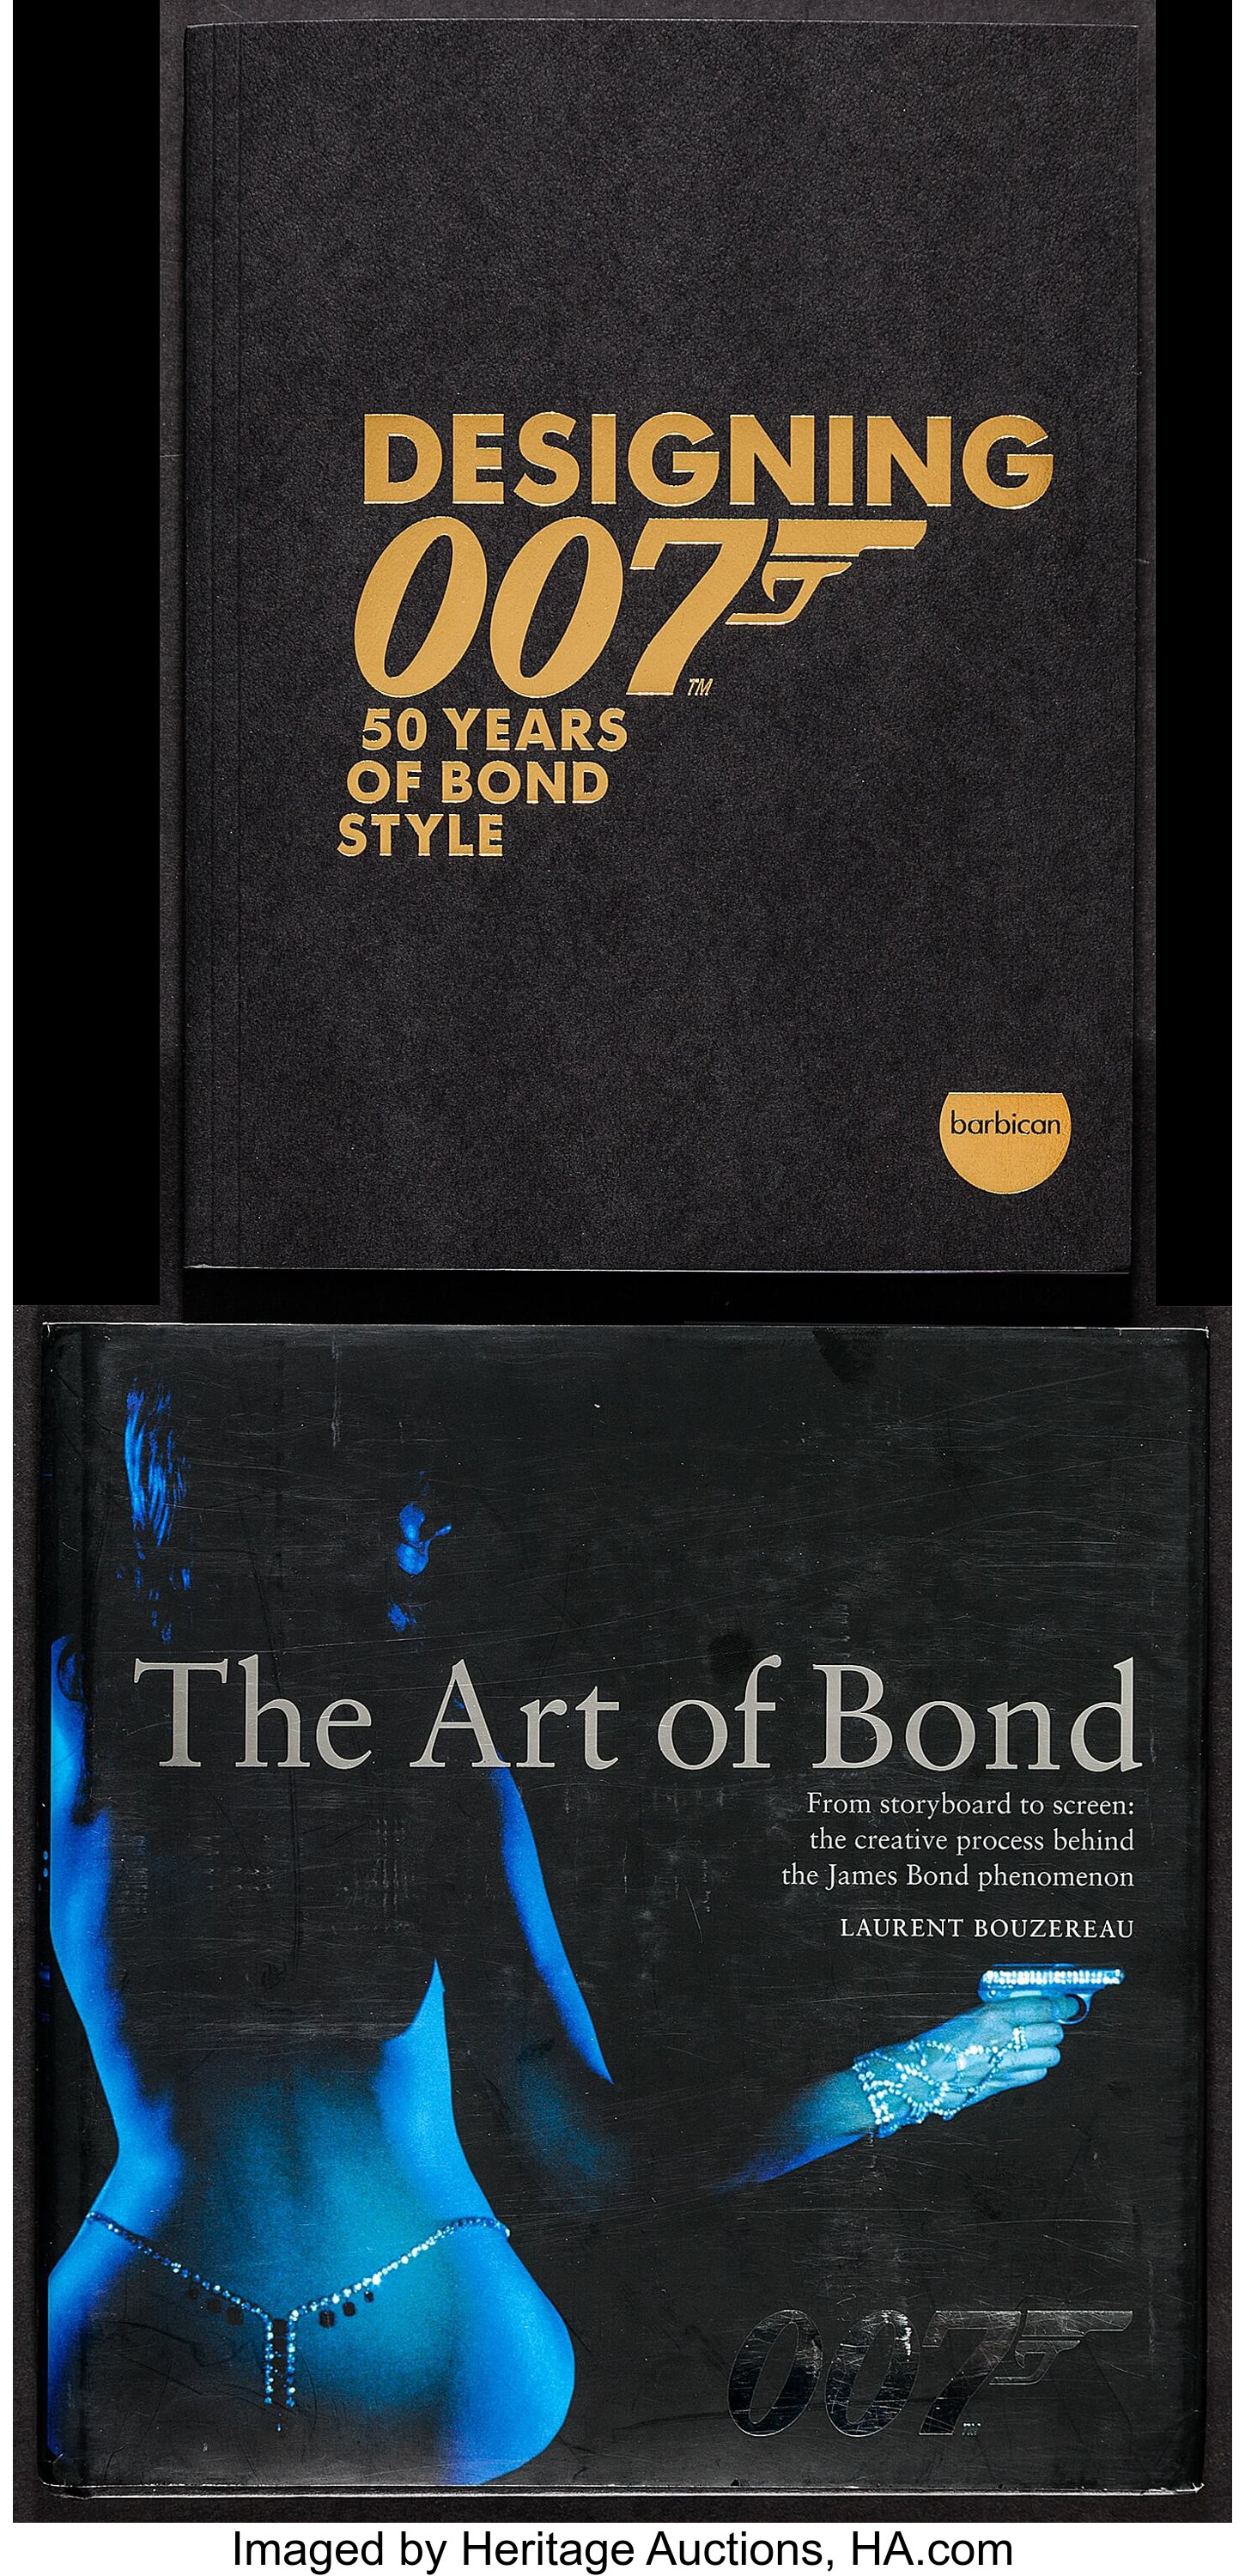 Designing 007: 50 Years of Bond Style & Other Lot (T&B, 2015